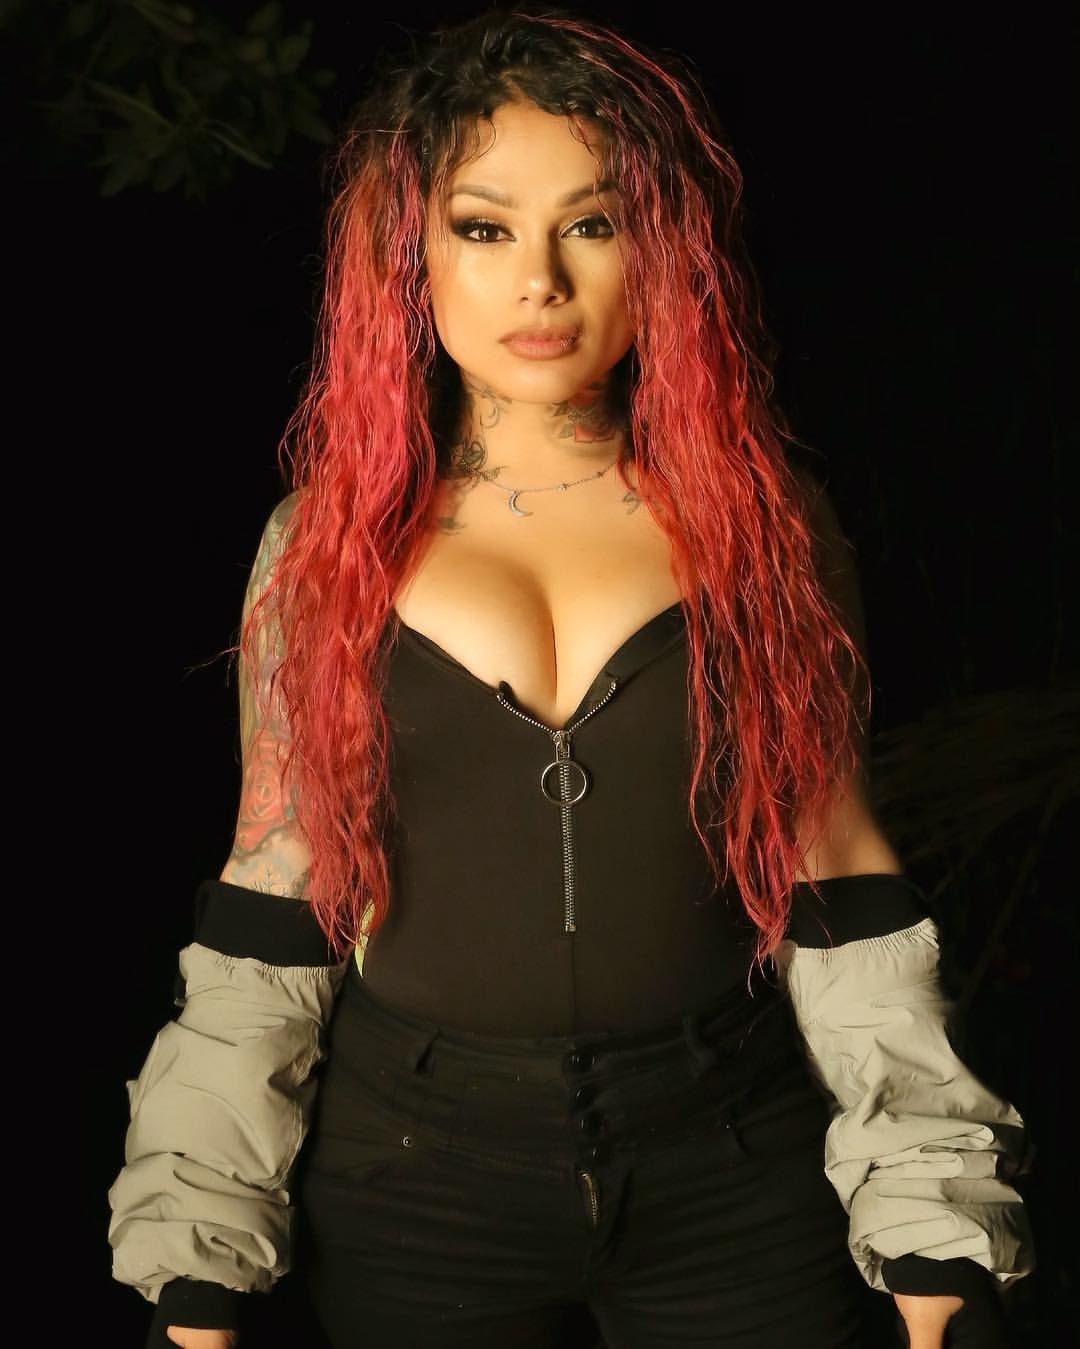 Snow Tha Product is a rapper from San Jose, CA (currently based in LA thoug...